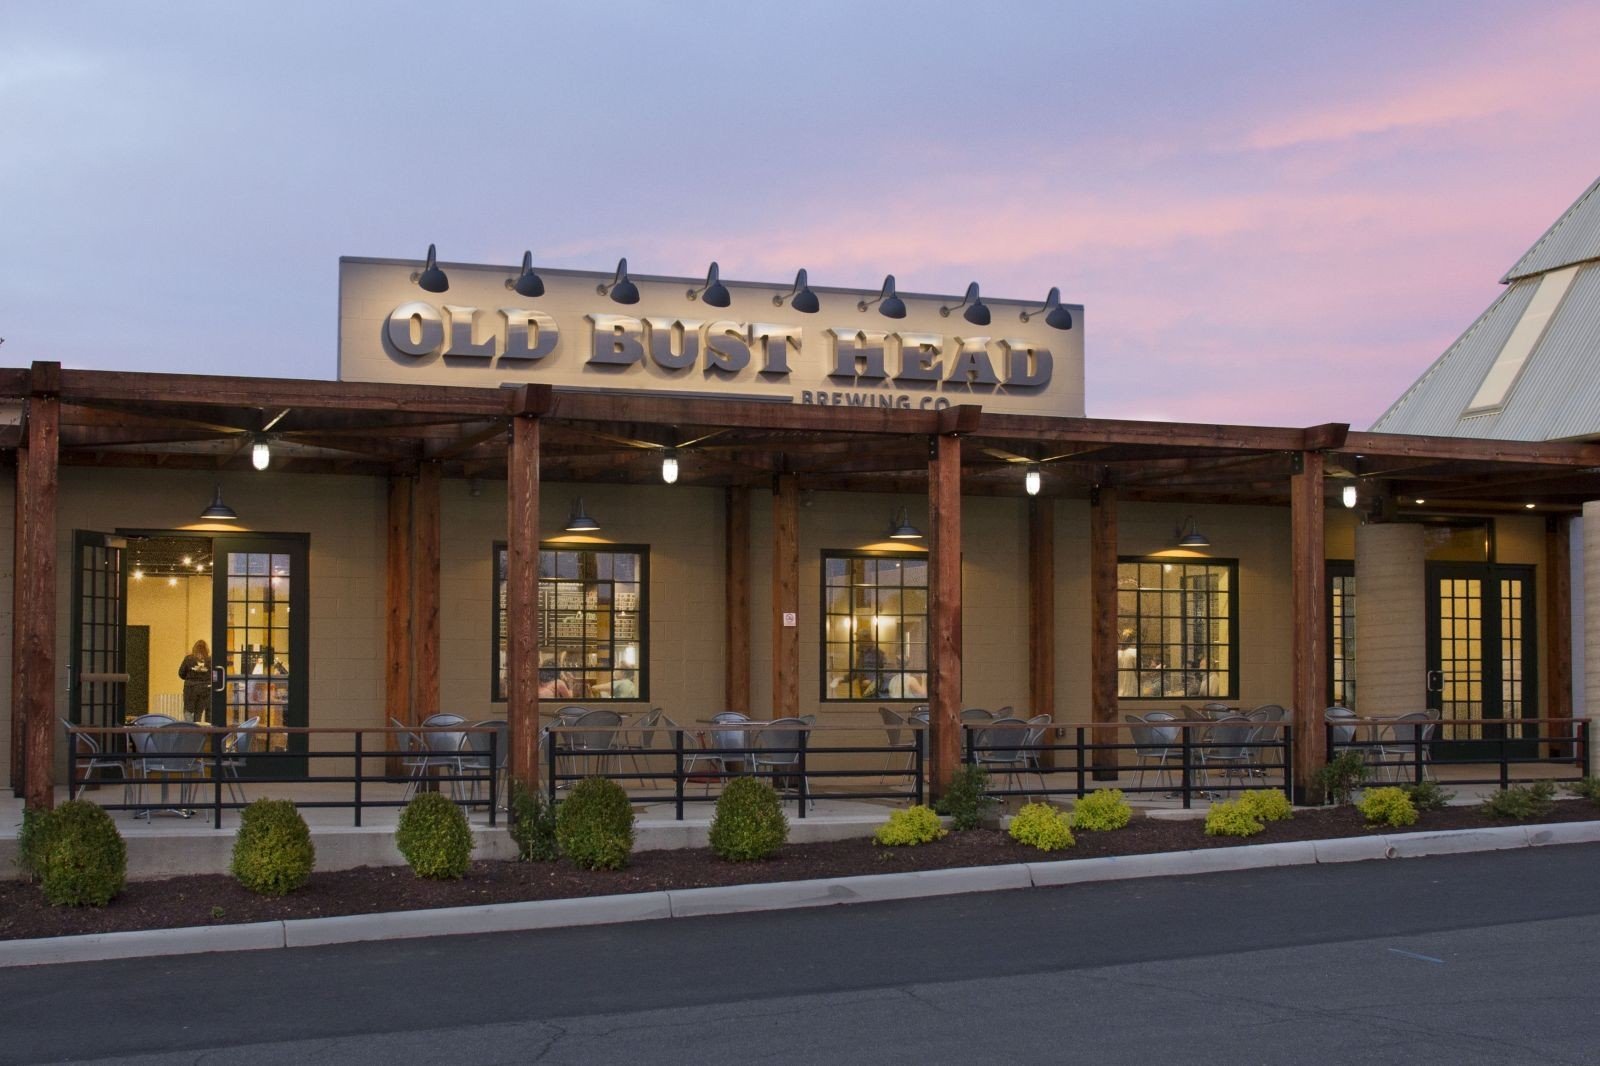 Old Bust Head brewery from United States